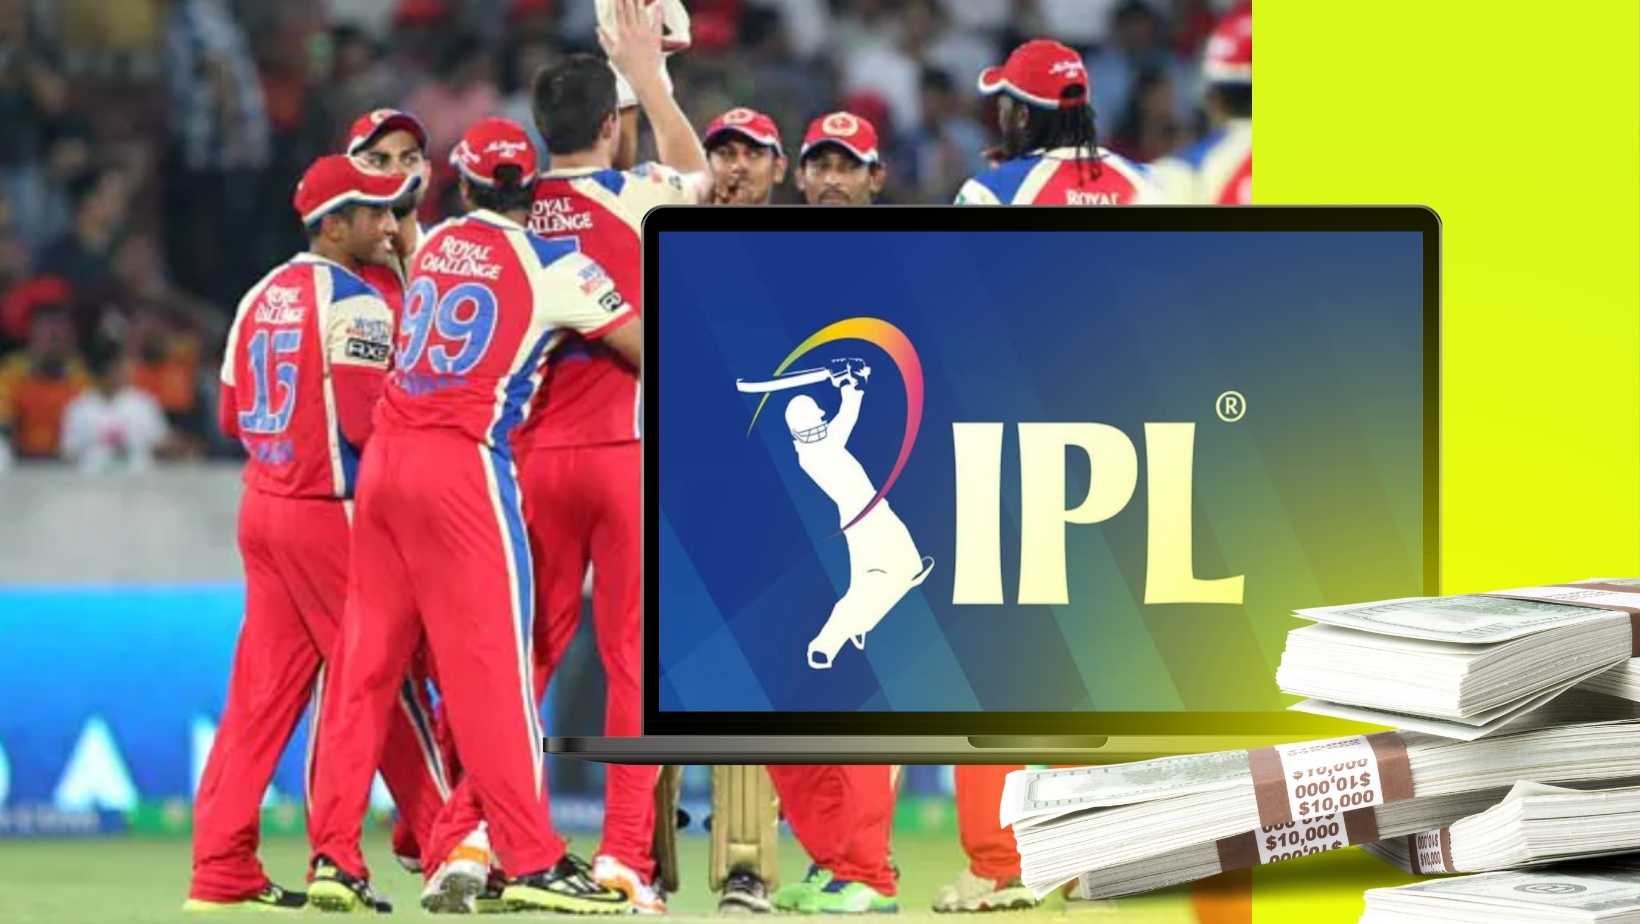 Websites for IPL betting and its benefits